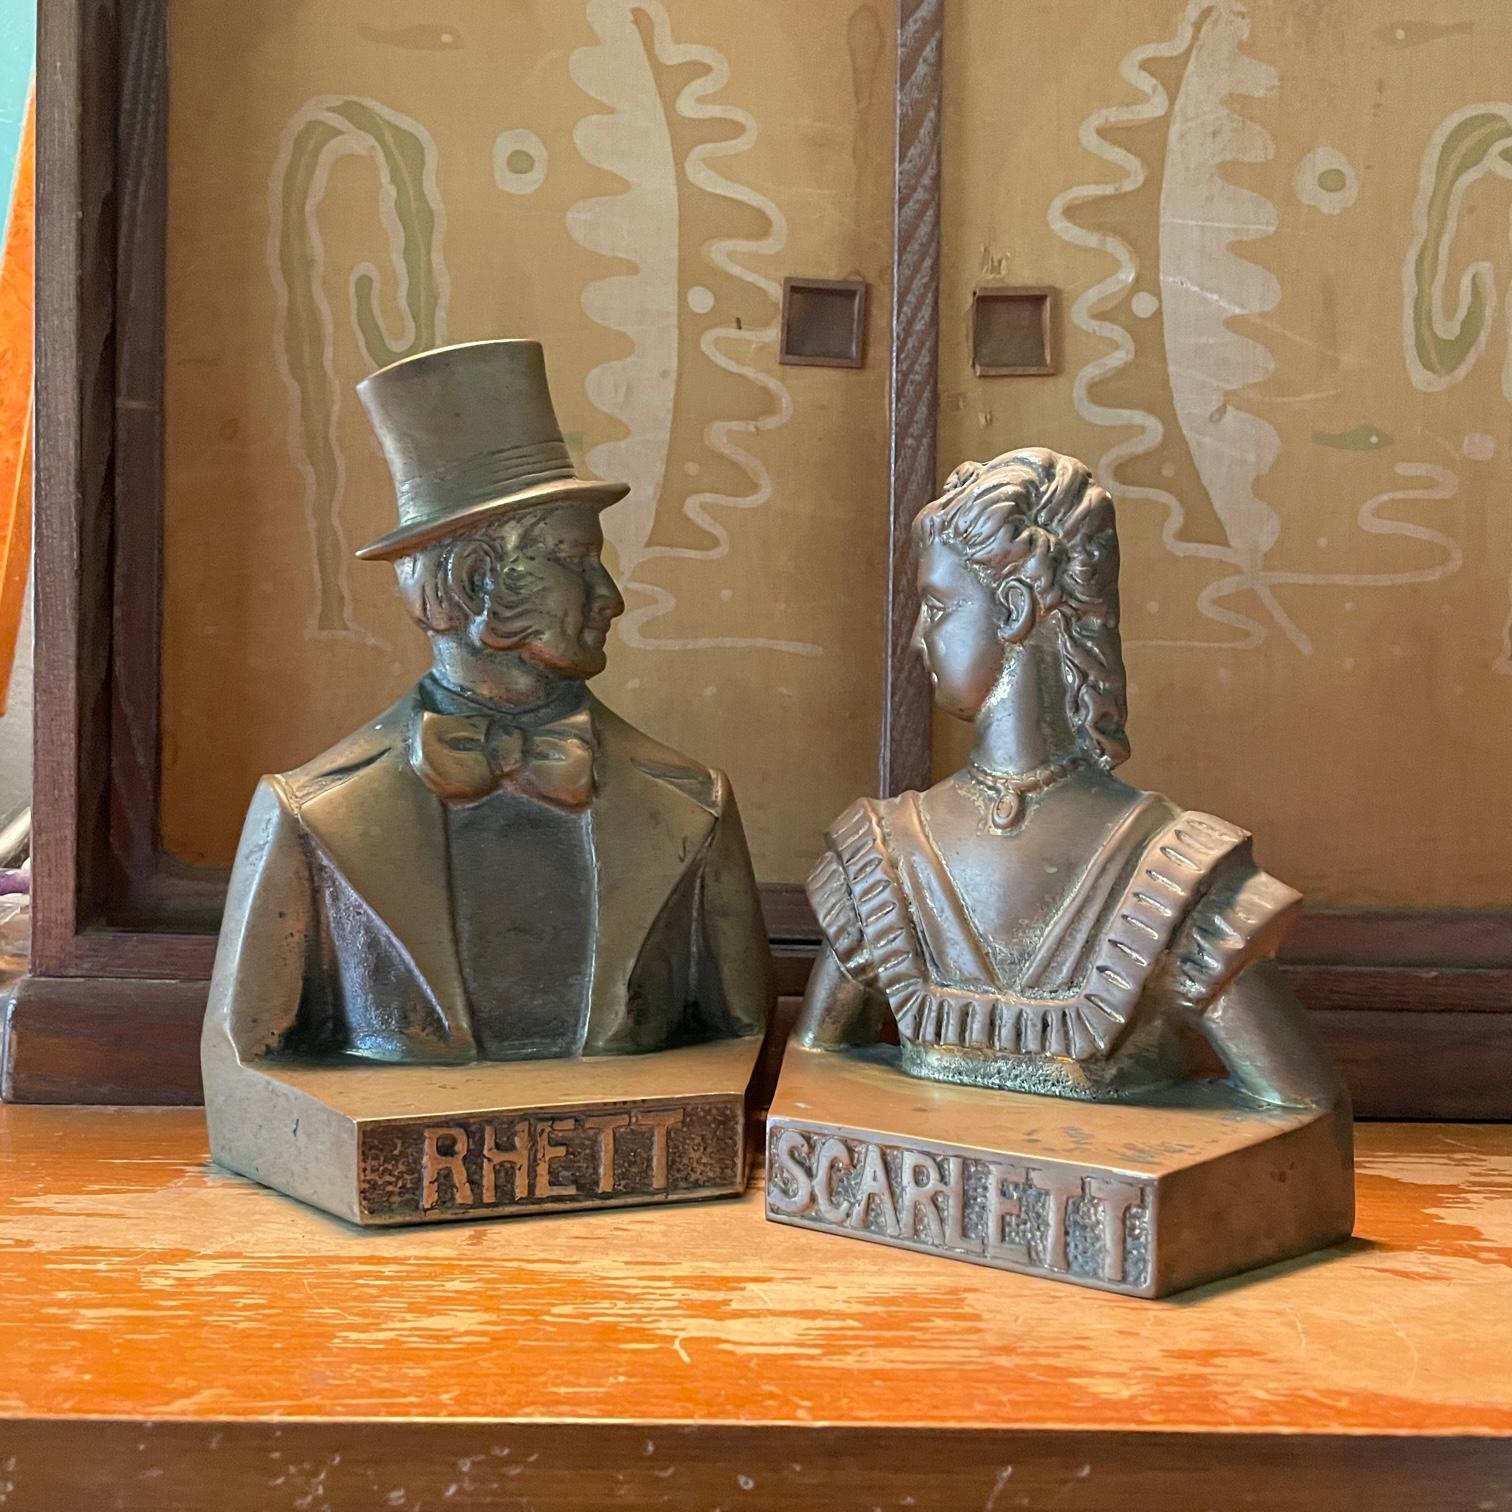 Hard to find original production movie promotional item for the release of Gone with the Wind! Sculptures of Scarlett O'Hara and Rhett Butler as bookends. A first run brass, sharp and clean casting. Procured from very old Washington DC older